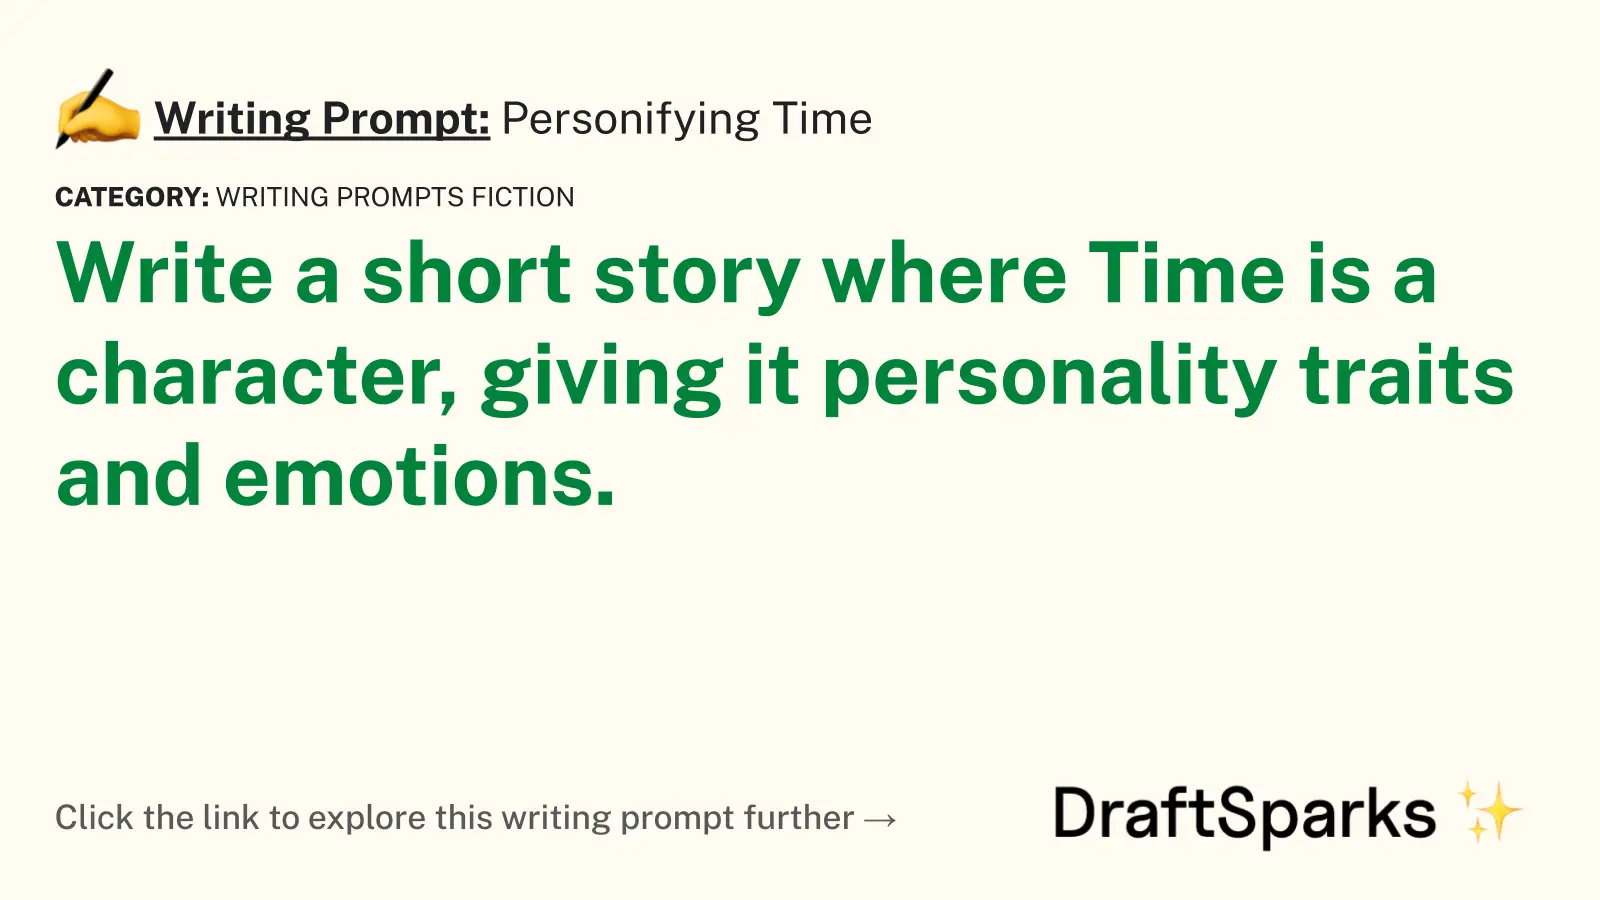 Personifying Time